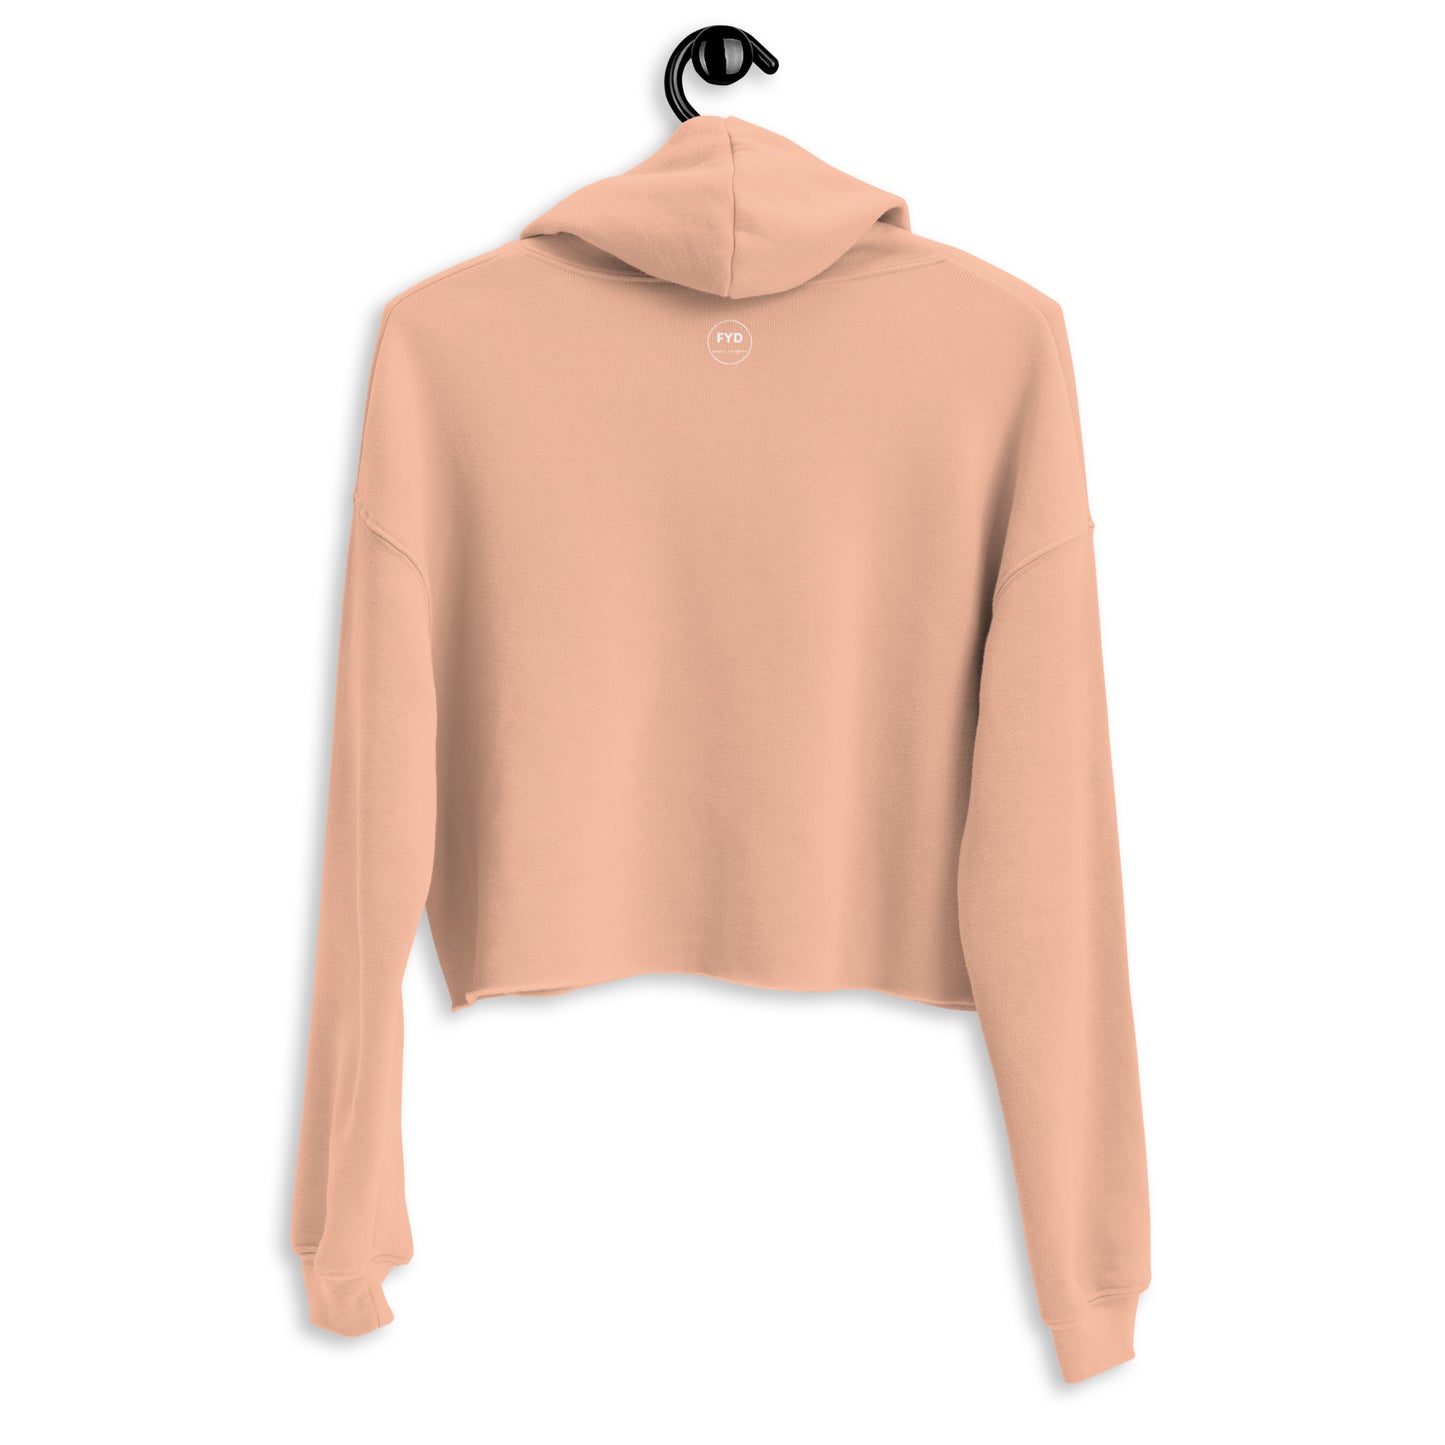 Crop Hoodie kissable lips in 4 colors - familiar...yet different